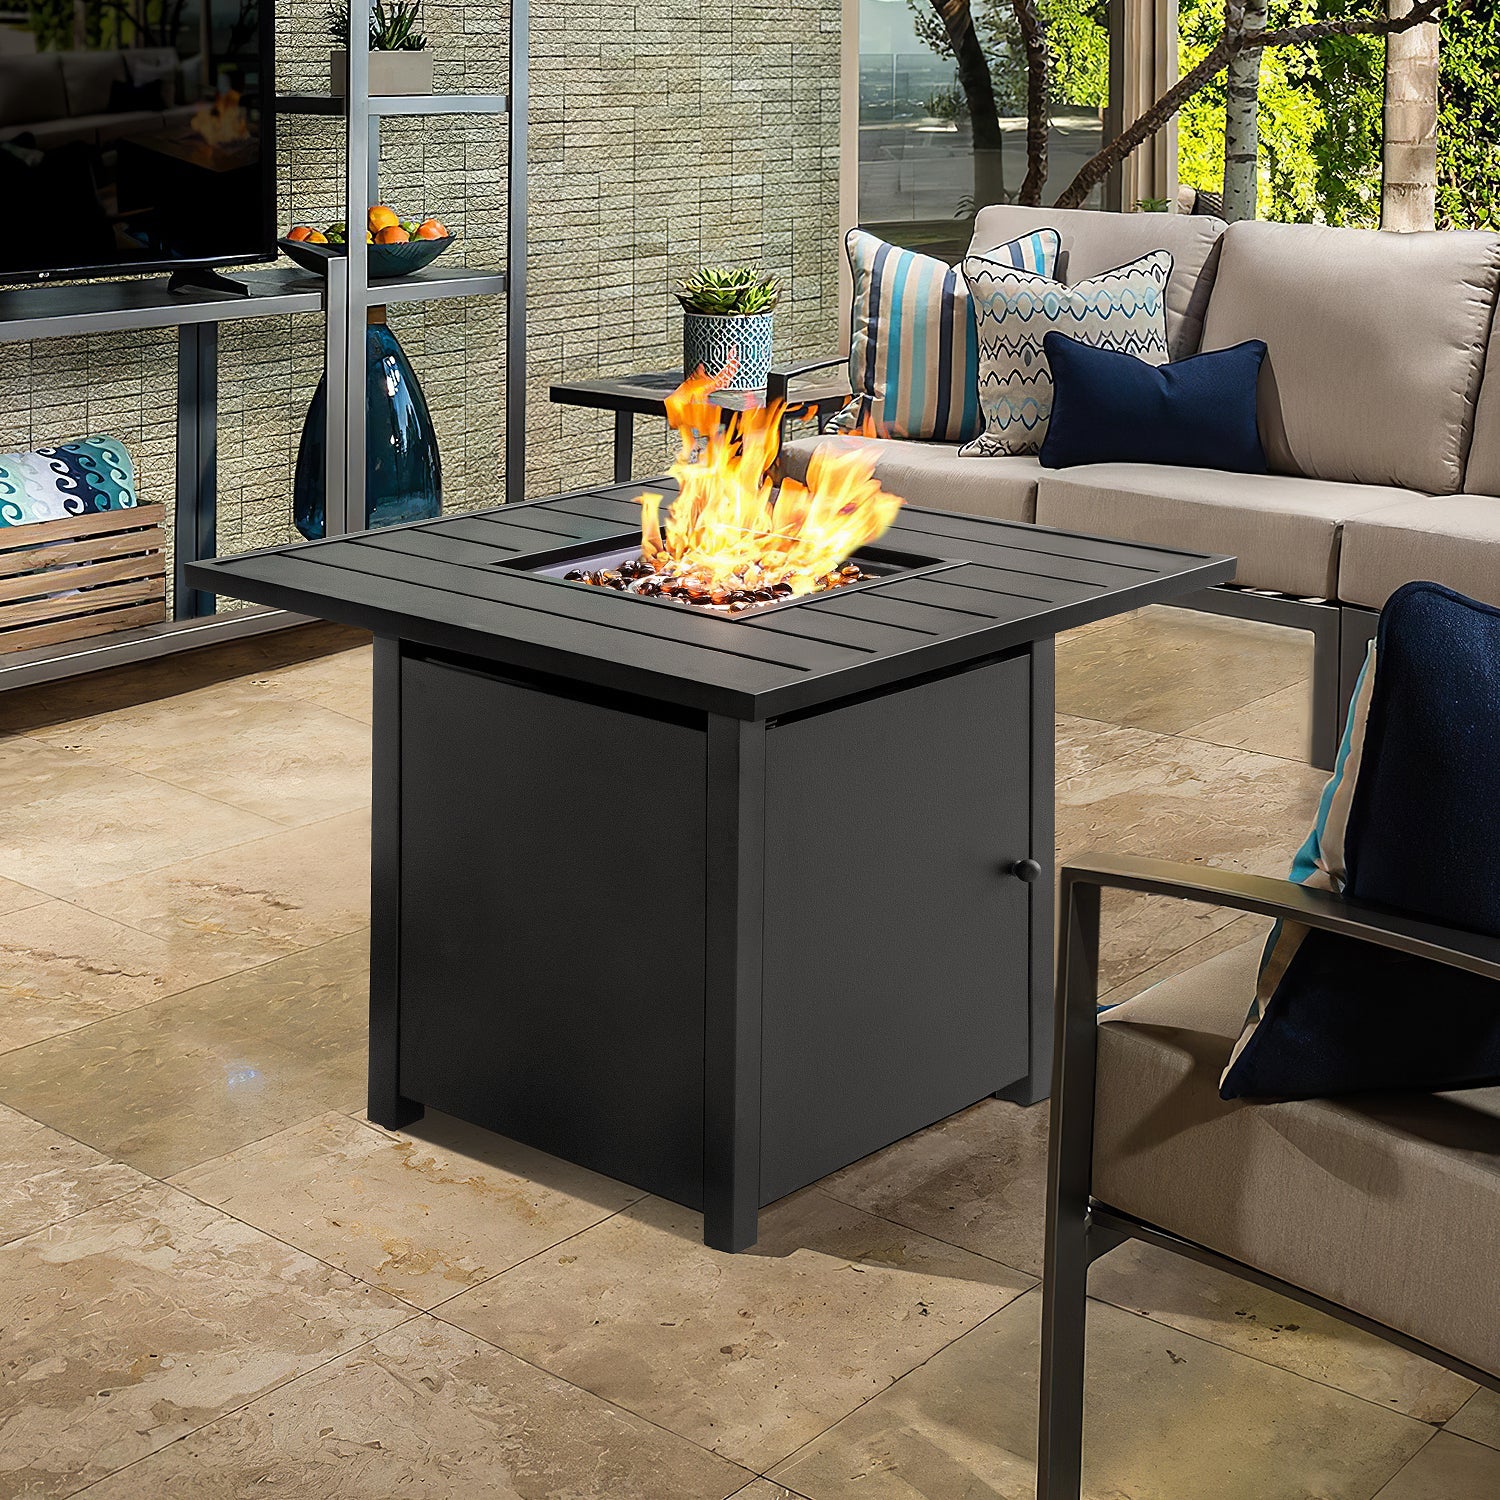 An Overview of Tabletop Fire Pits